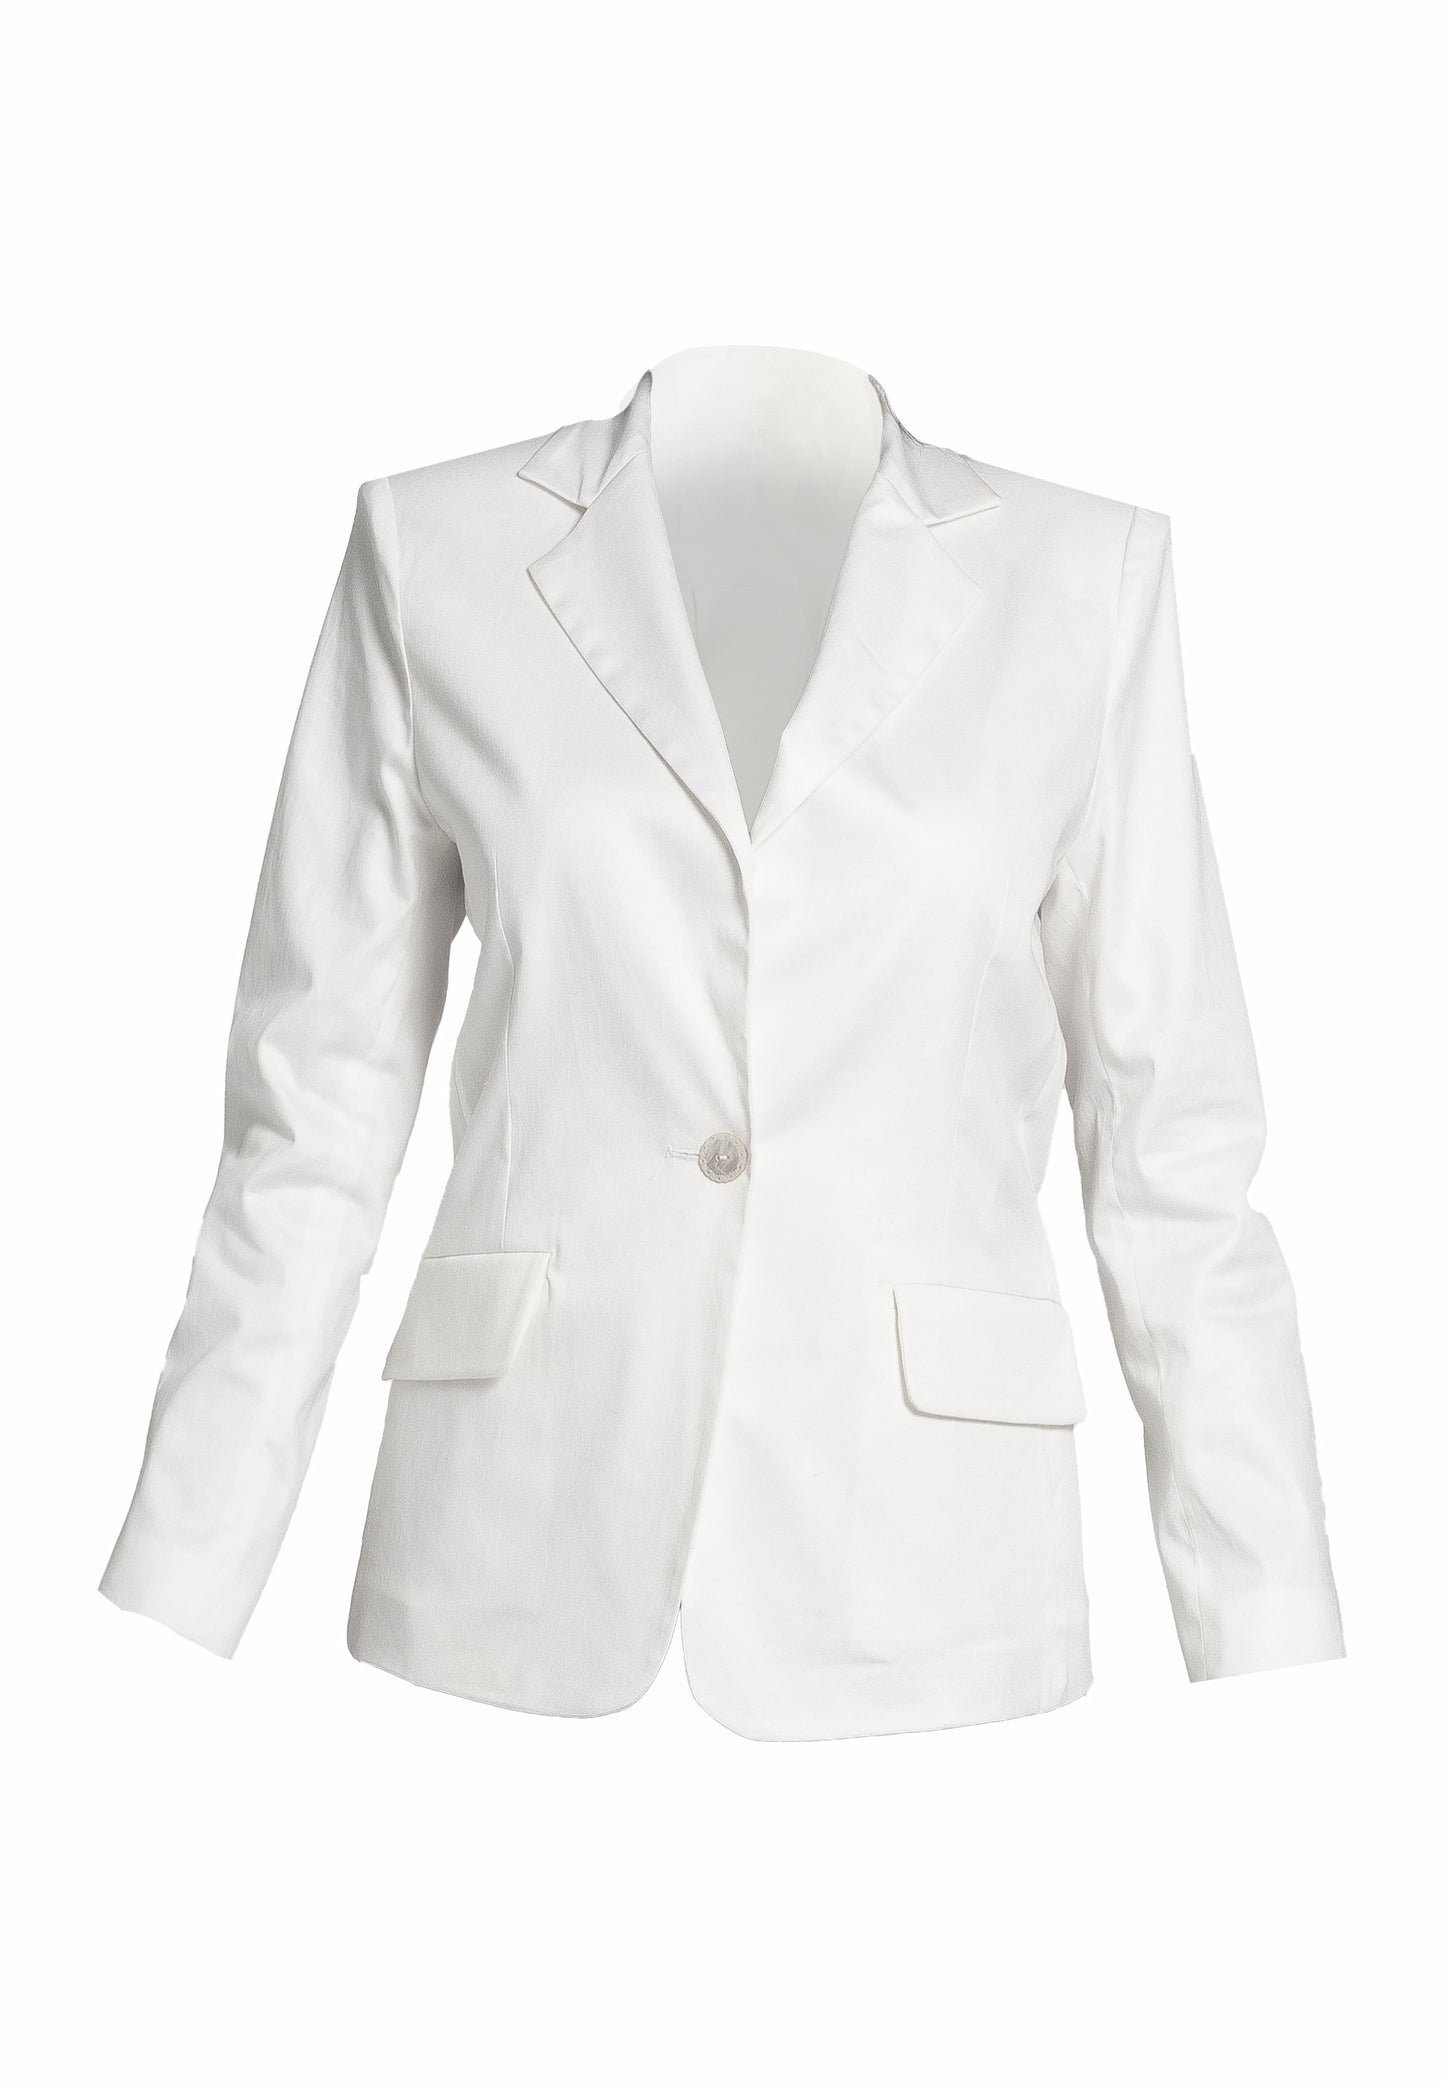 Girasole White Jacket - Soft Cotton Stretch, Classic Collar, Two-Button Lacing, Rounded Hem, Classic Shoulder